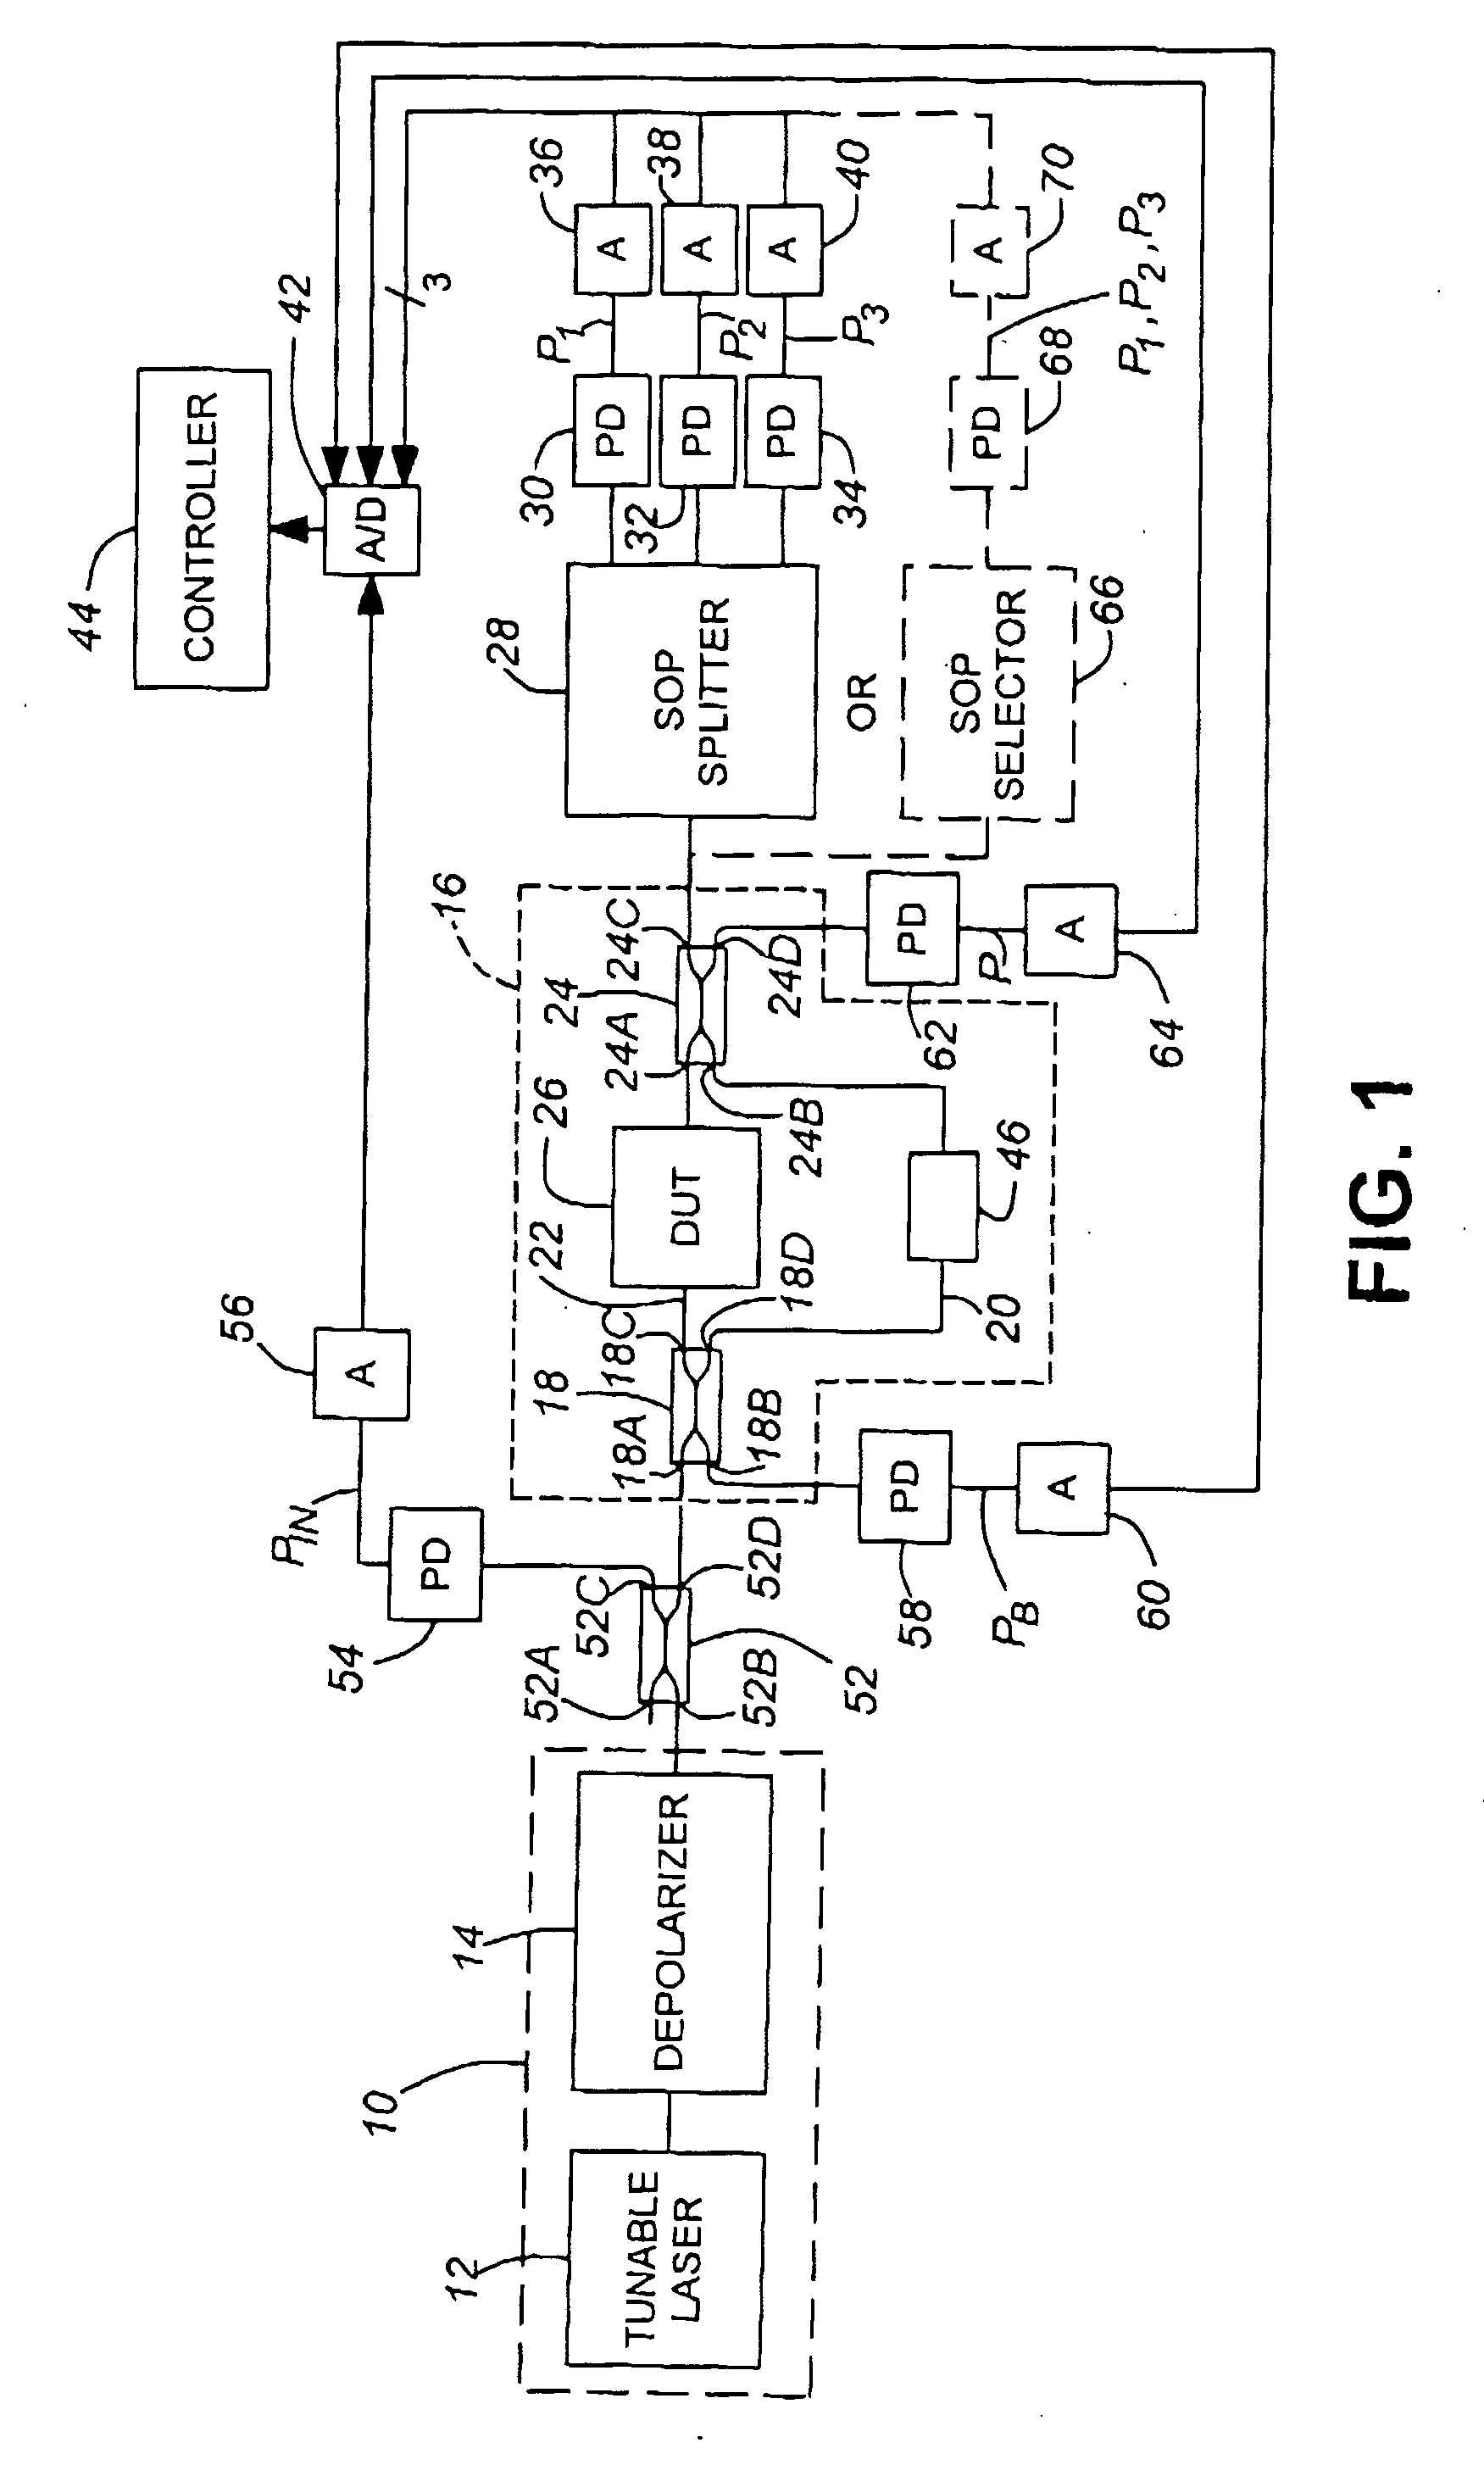 Interferometric optical analyzer and method for measuring the linear response of an optical component